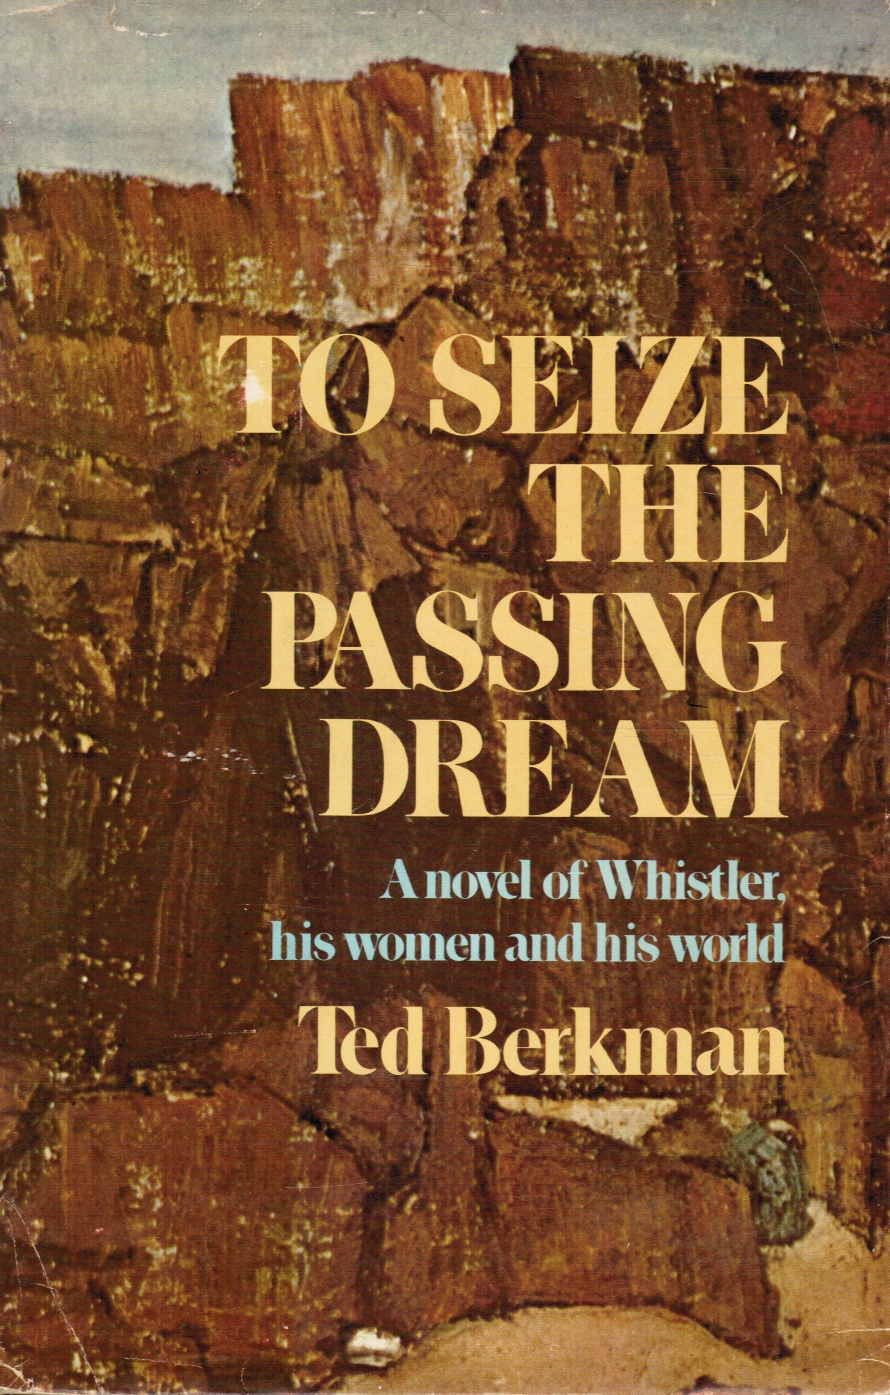 BERKMAN, TED - To Seize the Passing Dream a Novel of Whistler, His Women and His World